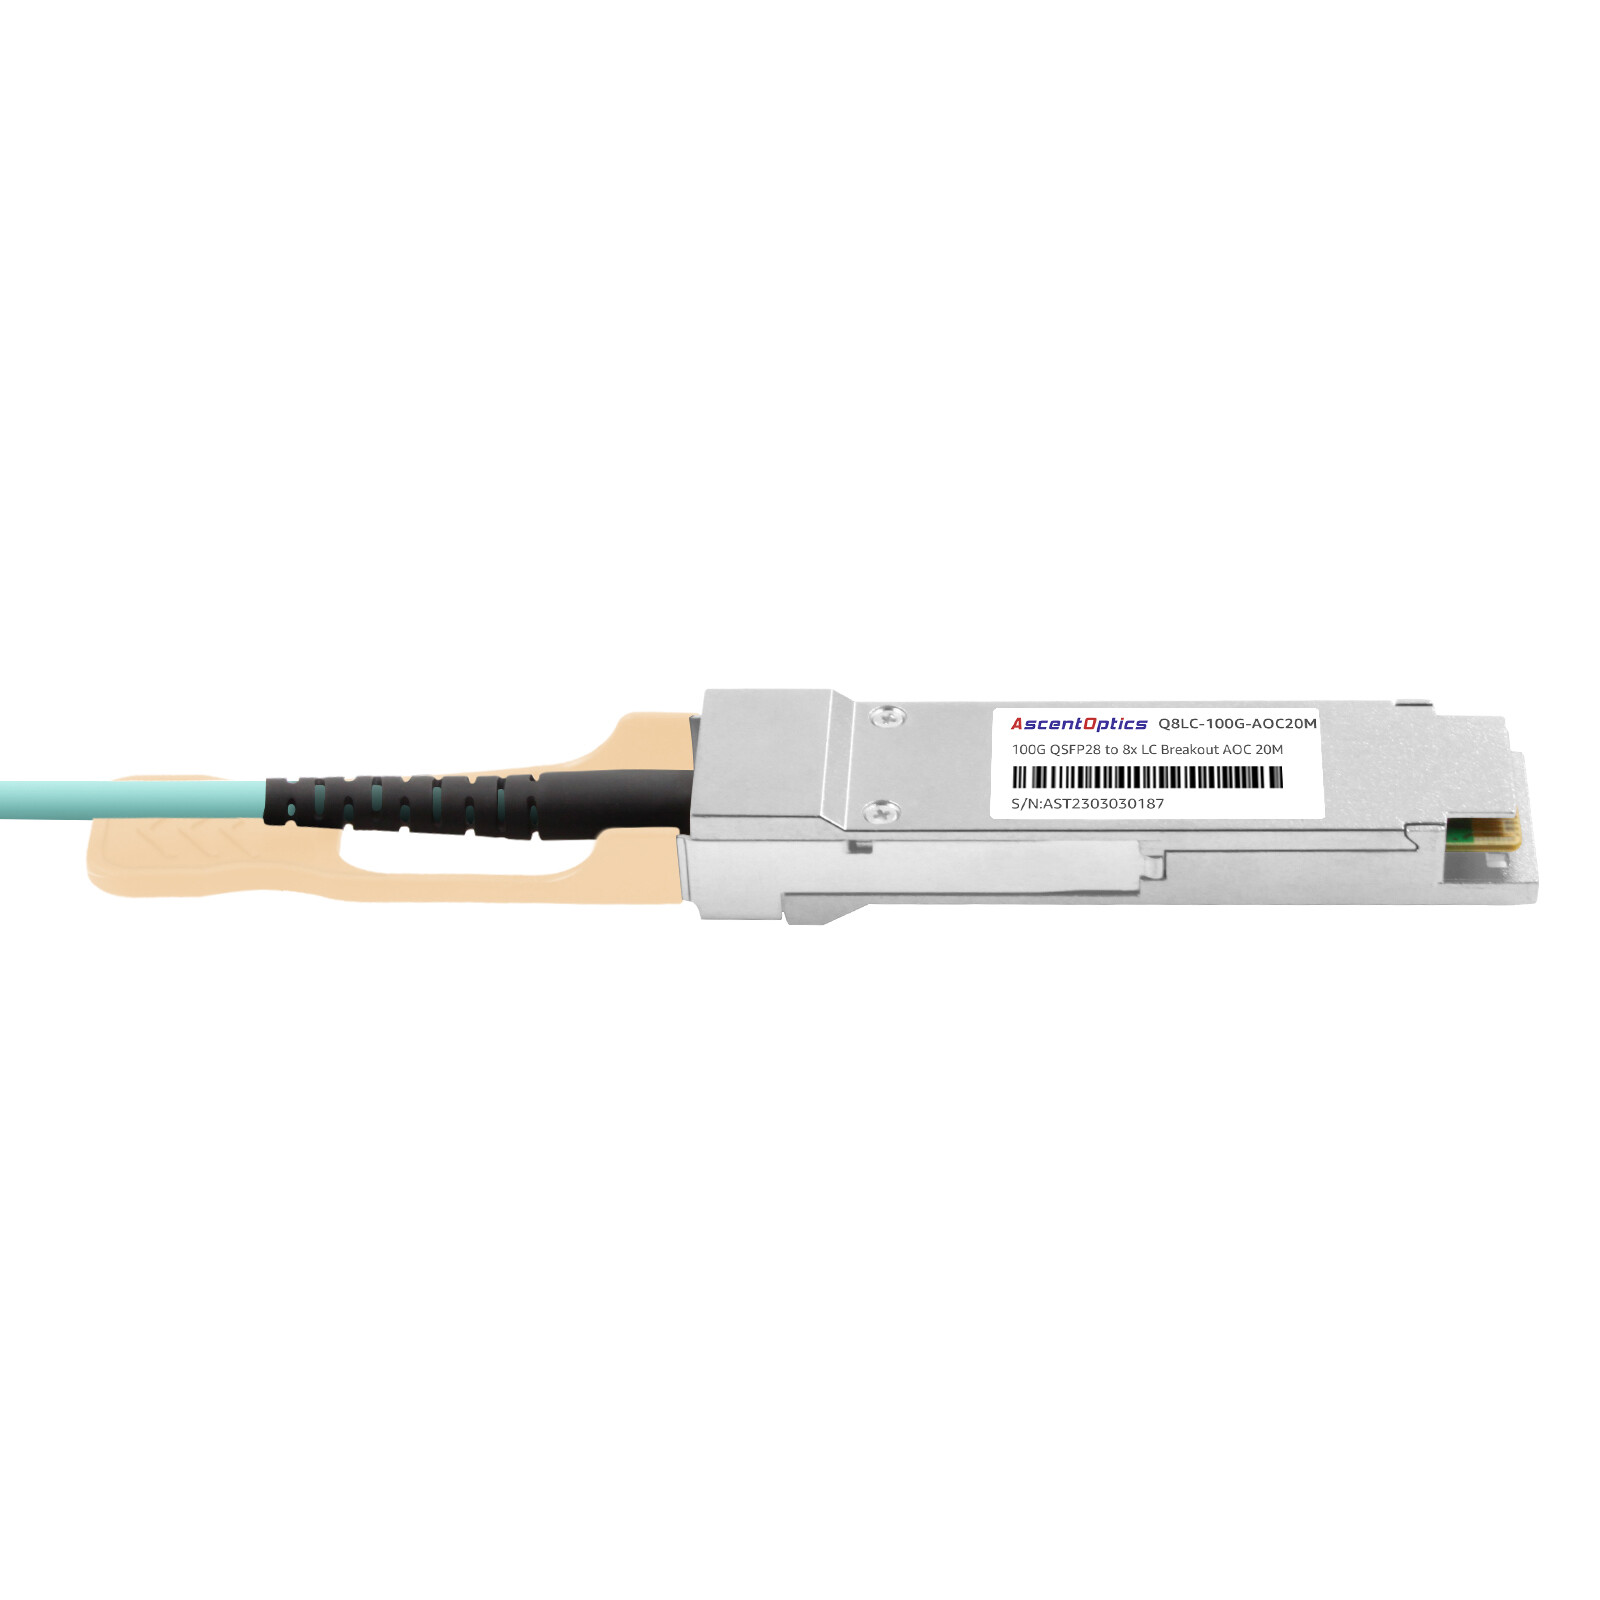 100G QSFP28 to 8x LC Breakout AOC Cable,20 Meters